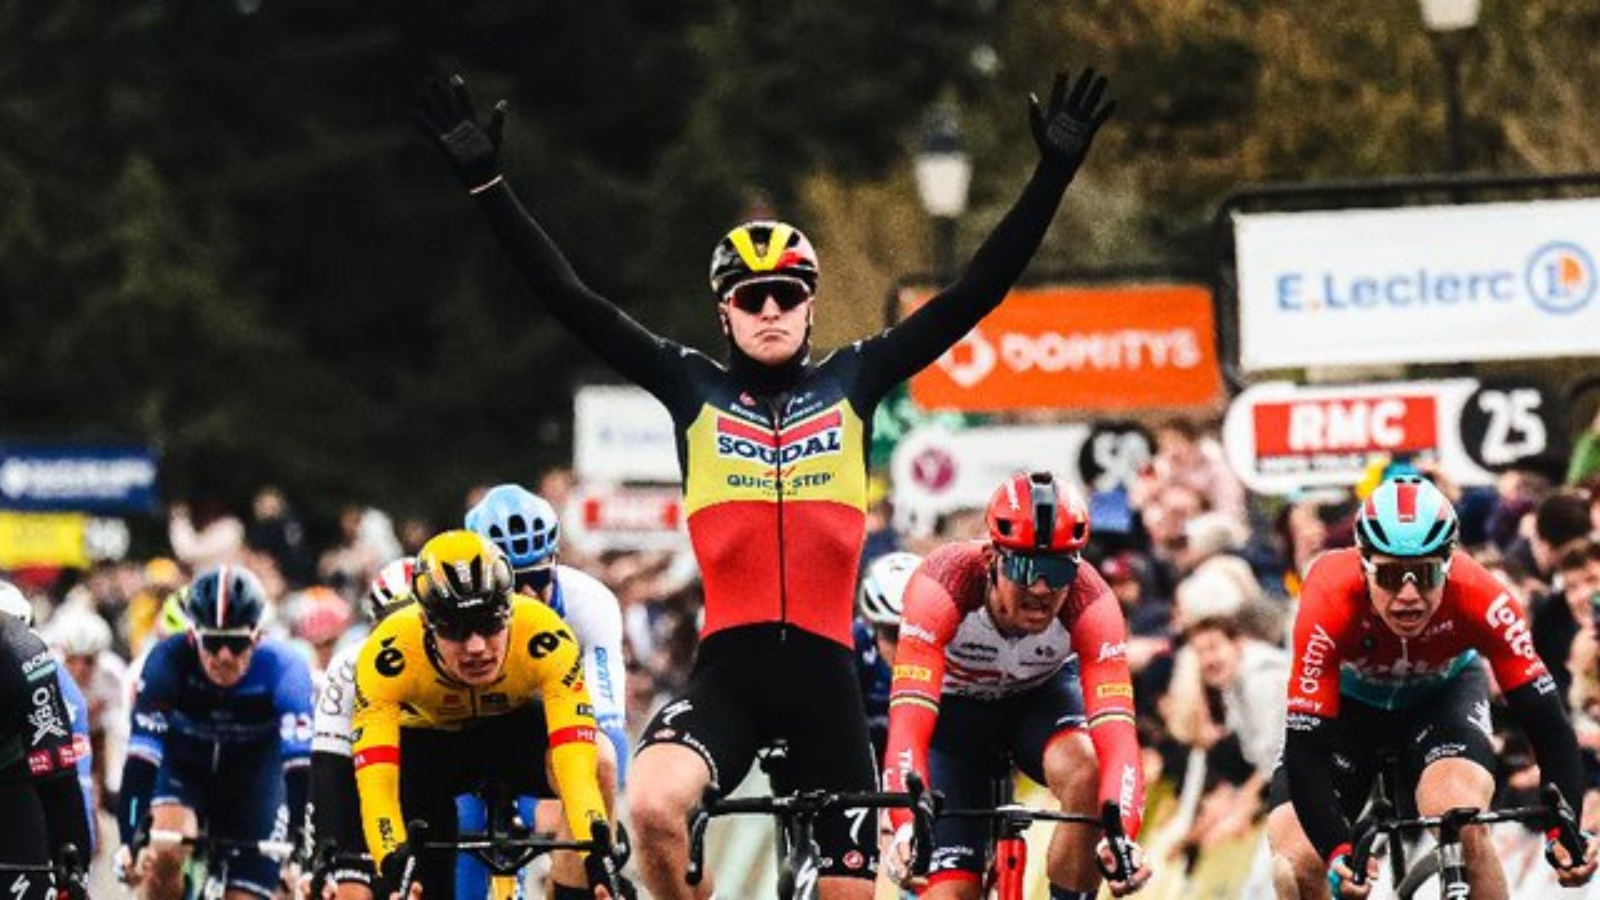 Belgian road cycling national champion Tim Merlier, winner of the first stage of Paris-Nice crossing the finish line